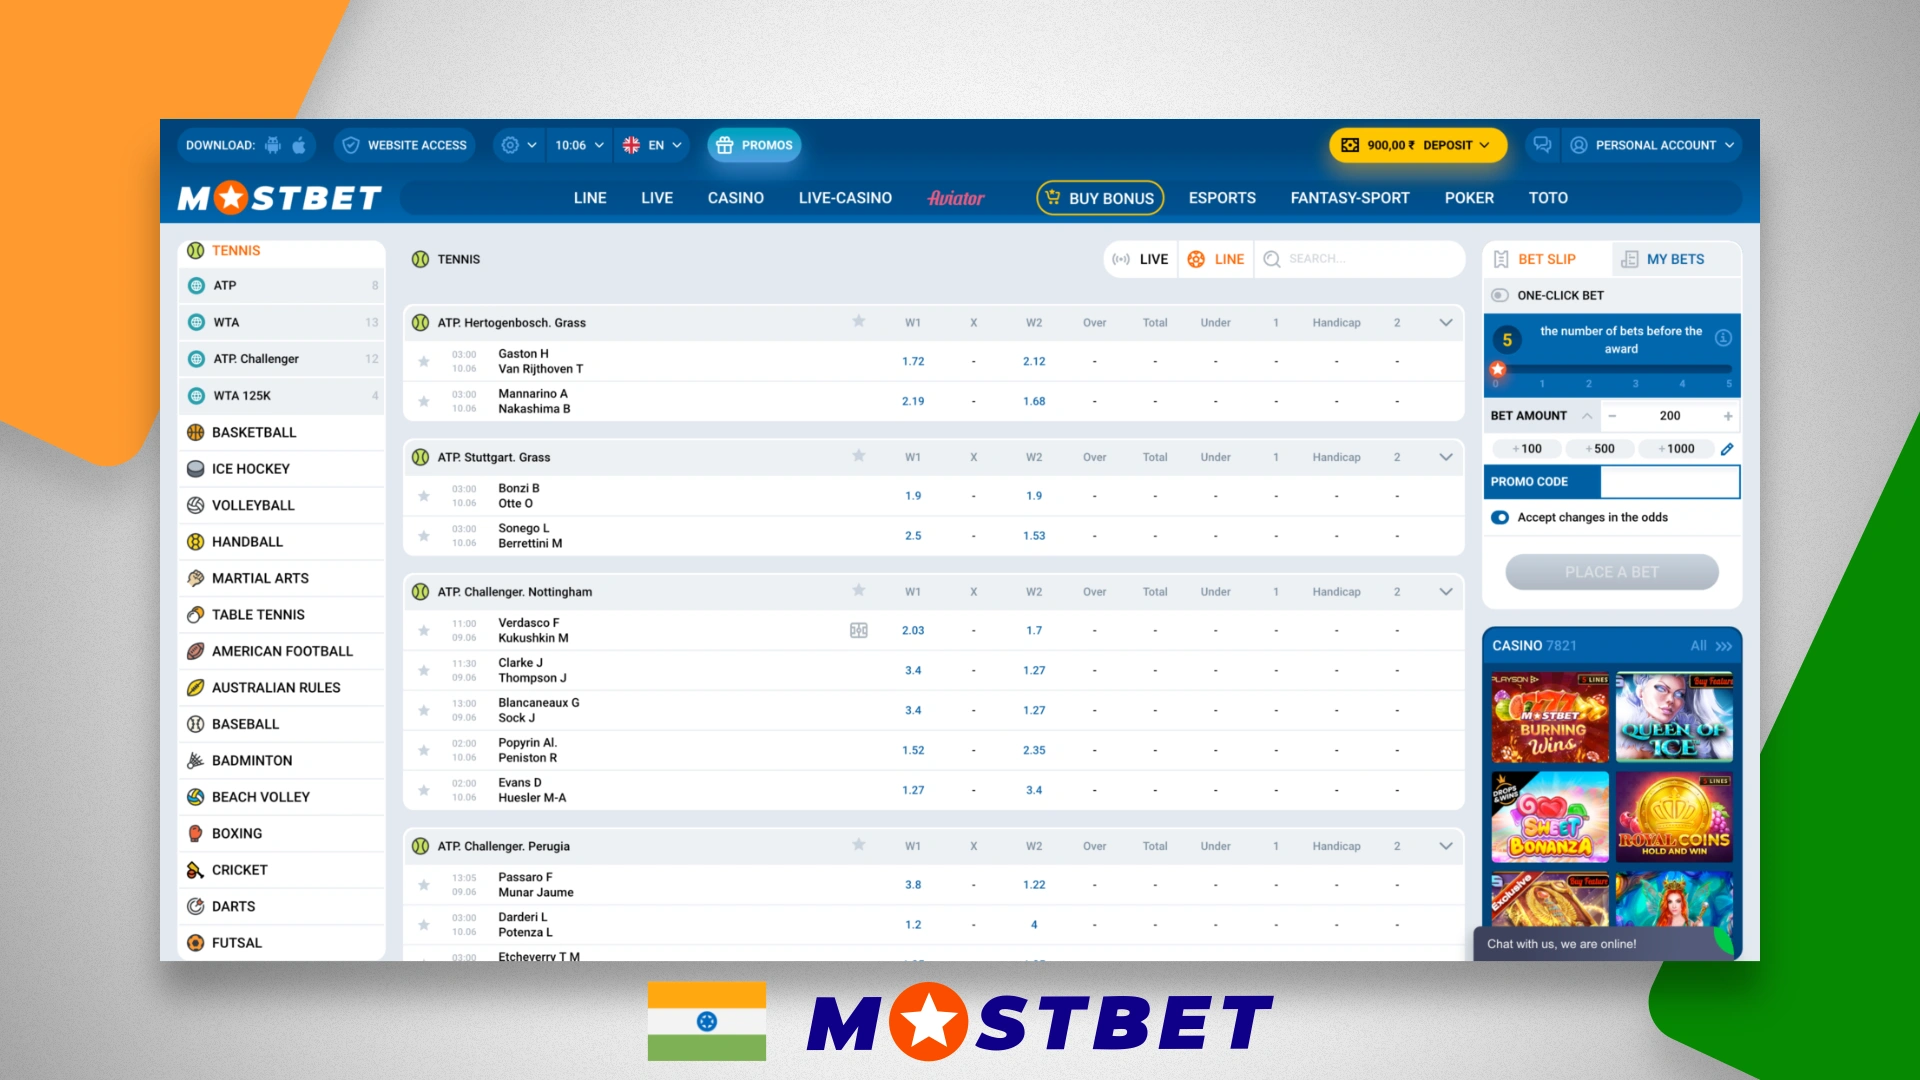 List of available tennis matches on which you can bet on the Mostbet website